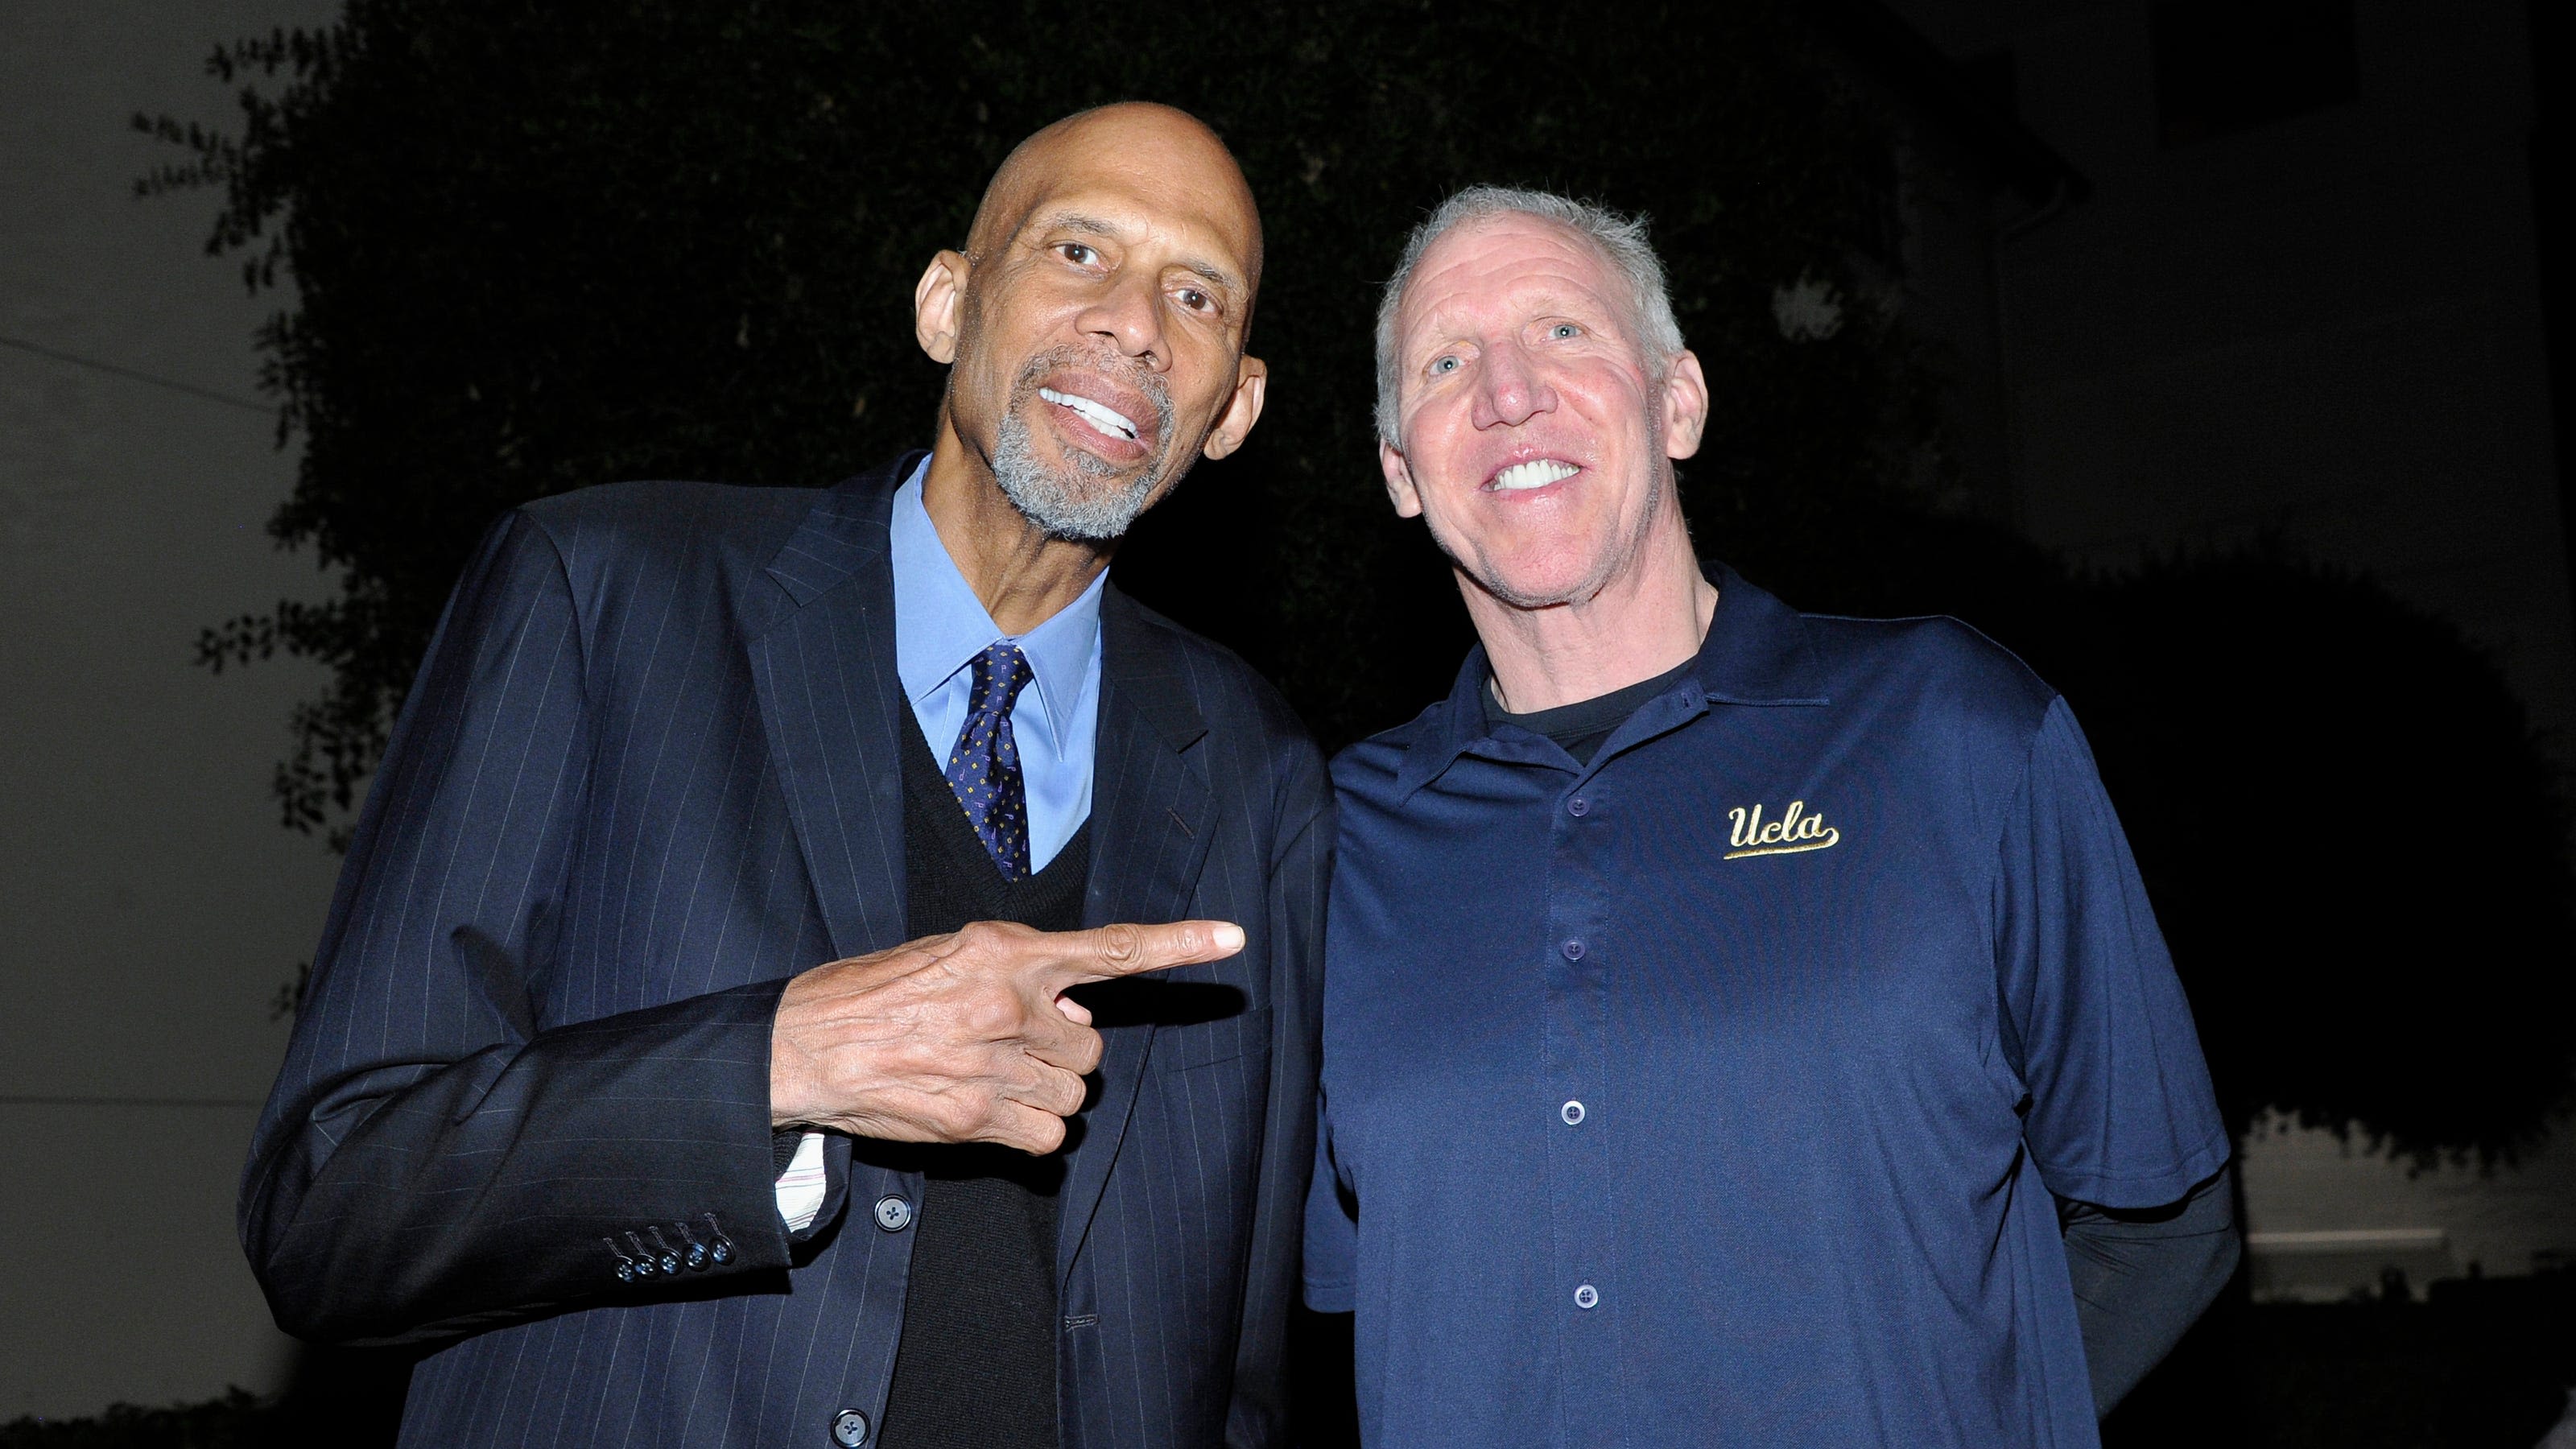 Kareem Abdul-Jabbar pays tribute to Bill Walton in touching statement: 'He was the best of us'